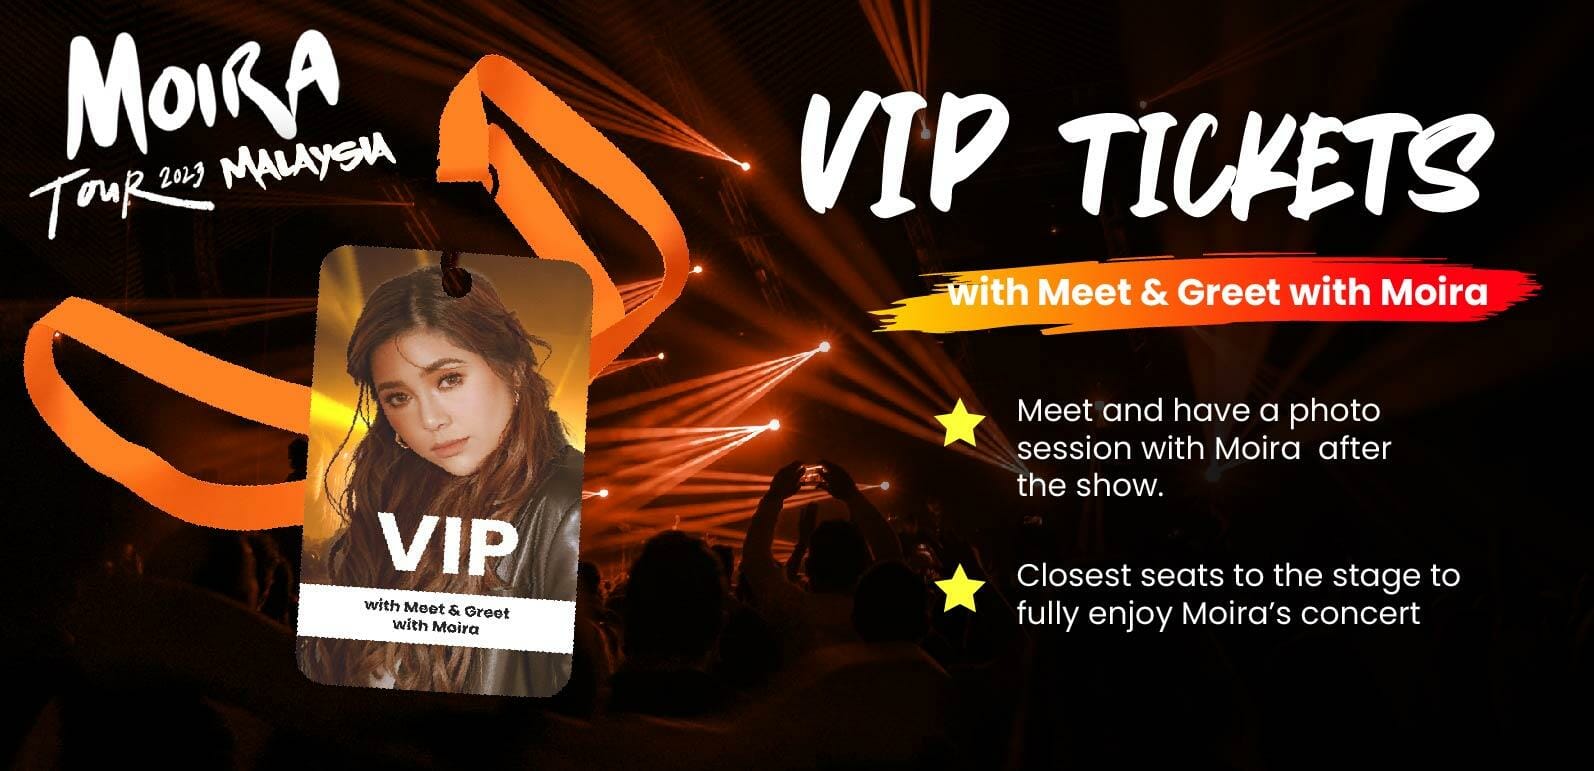 MoiraLive VIP Tickets